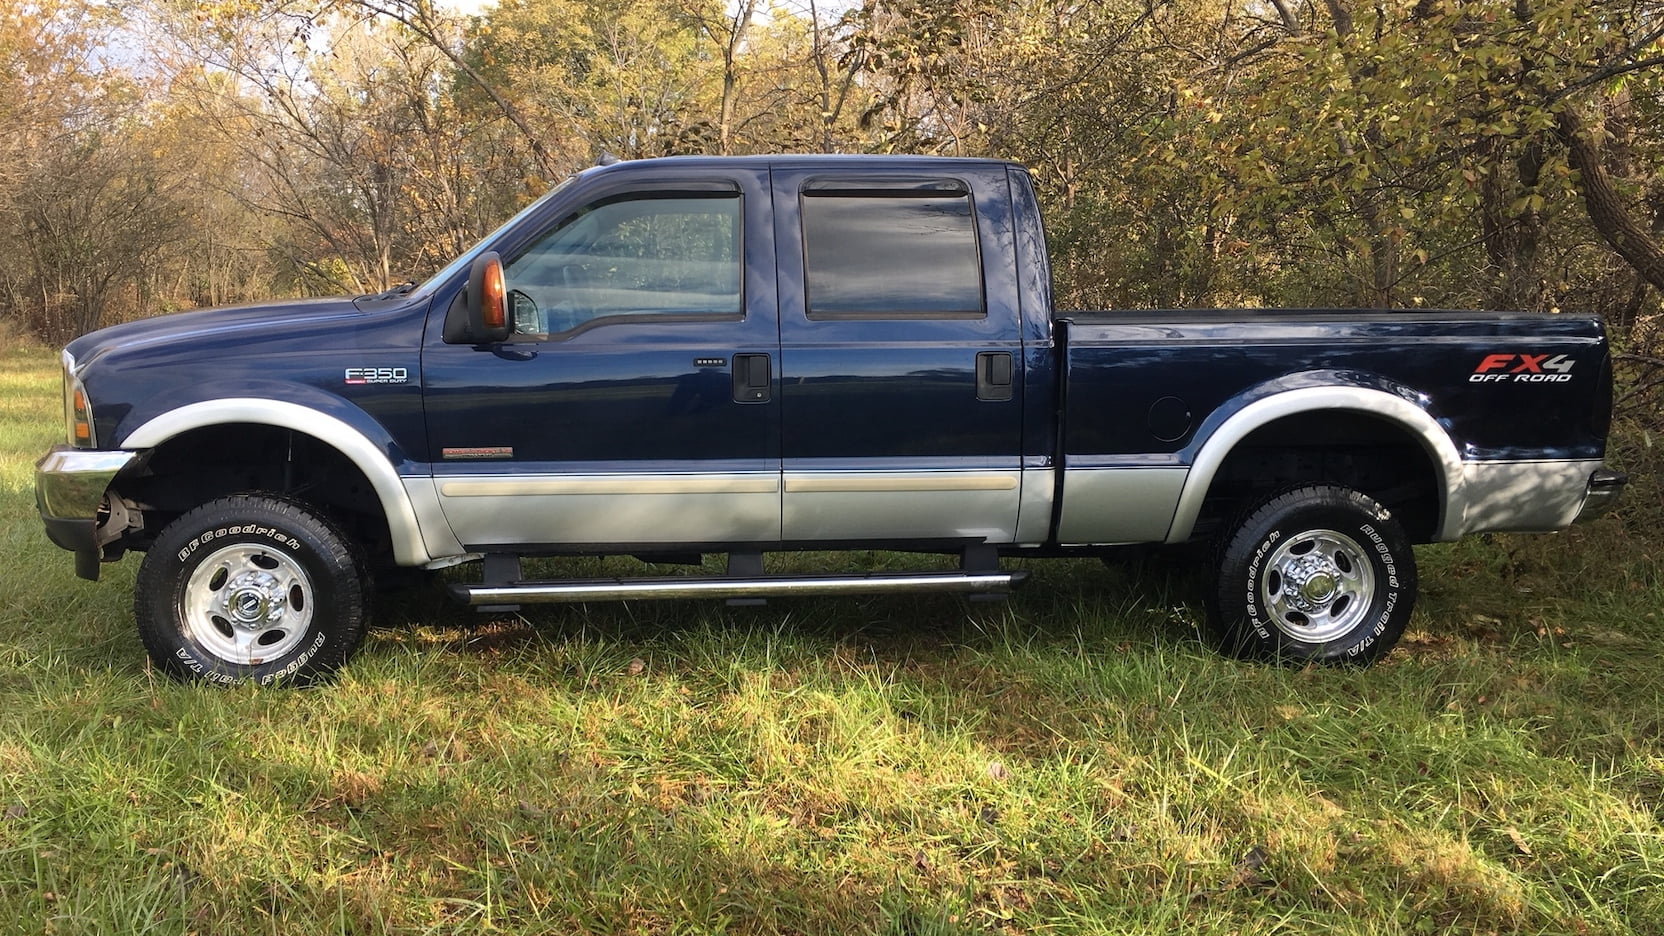 2004 Ford F350 Lariat Pickup | T172 | Chicago 2018